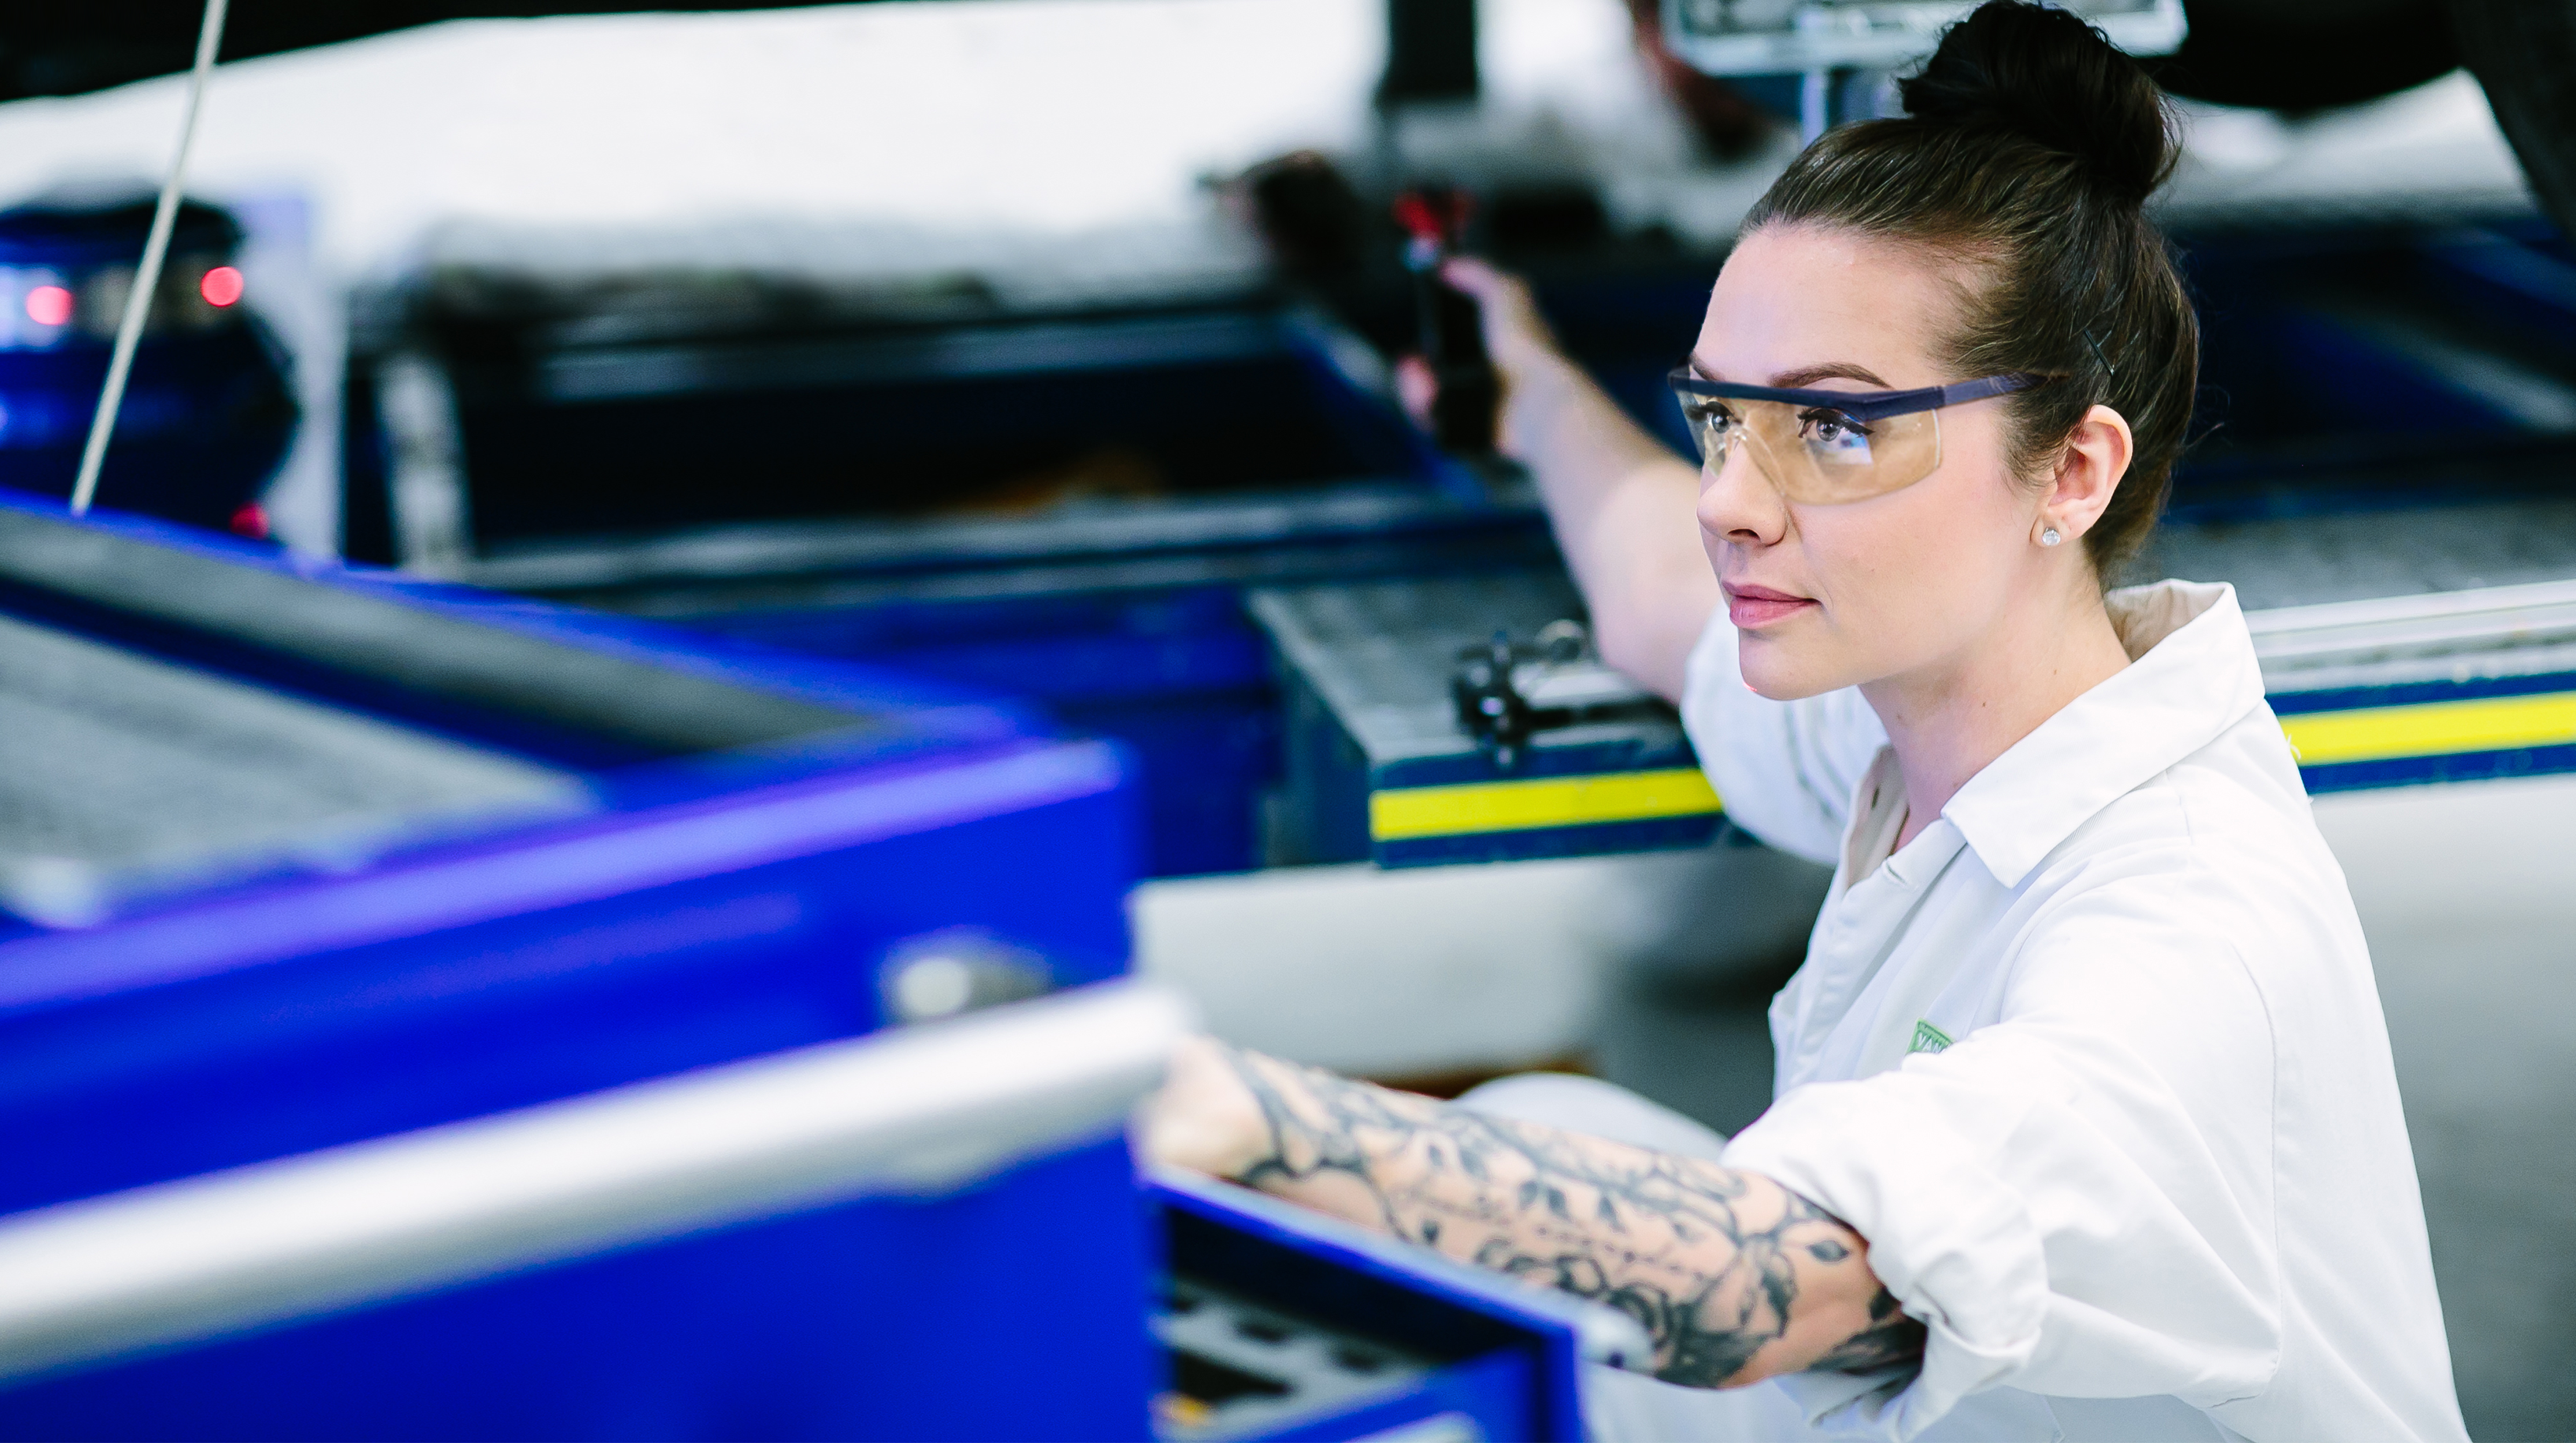 VCC commits to diversity as Canada’s first CADIA-certified automotive school